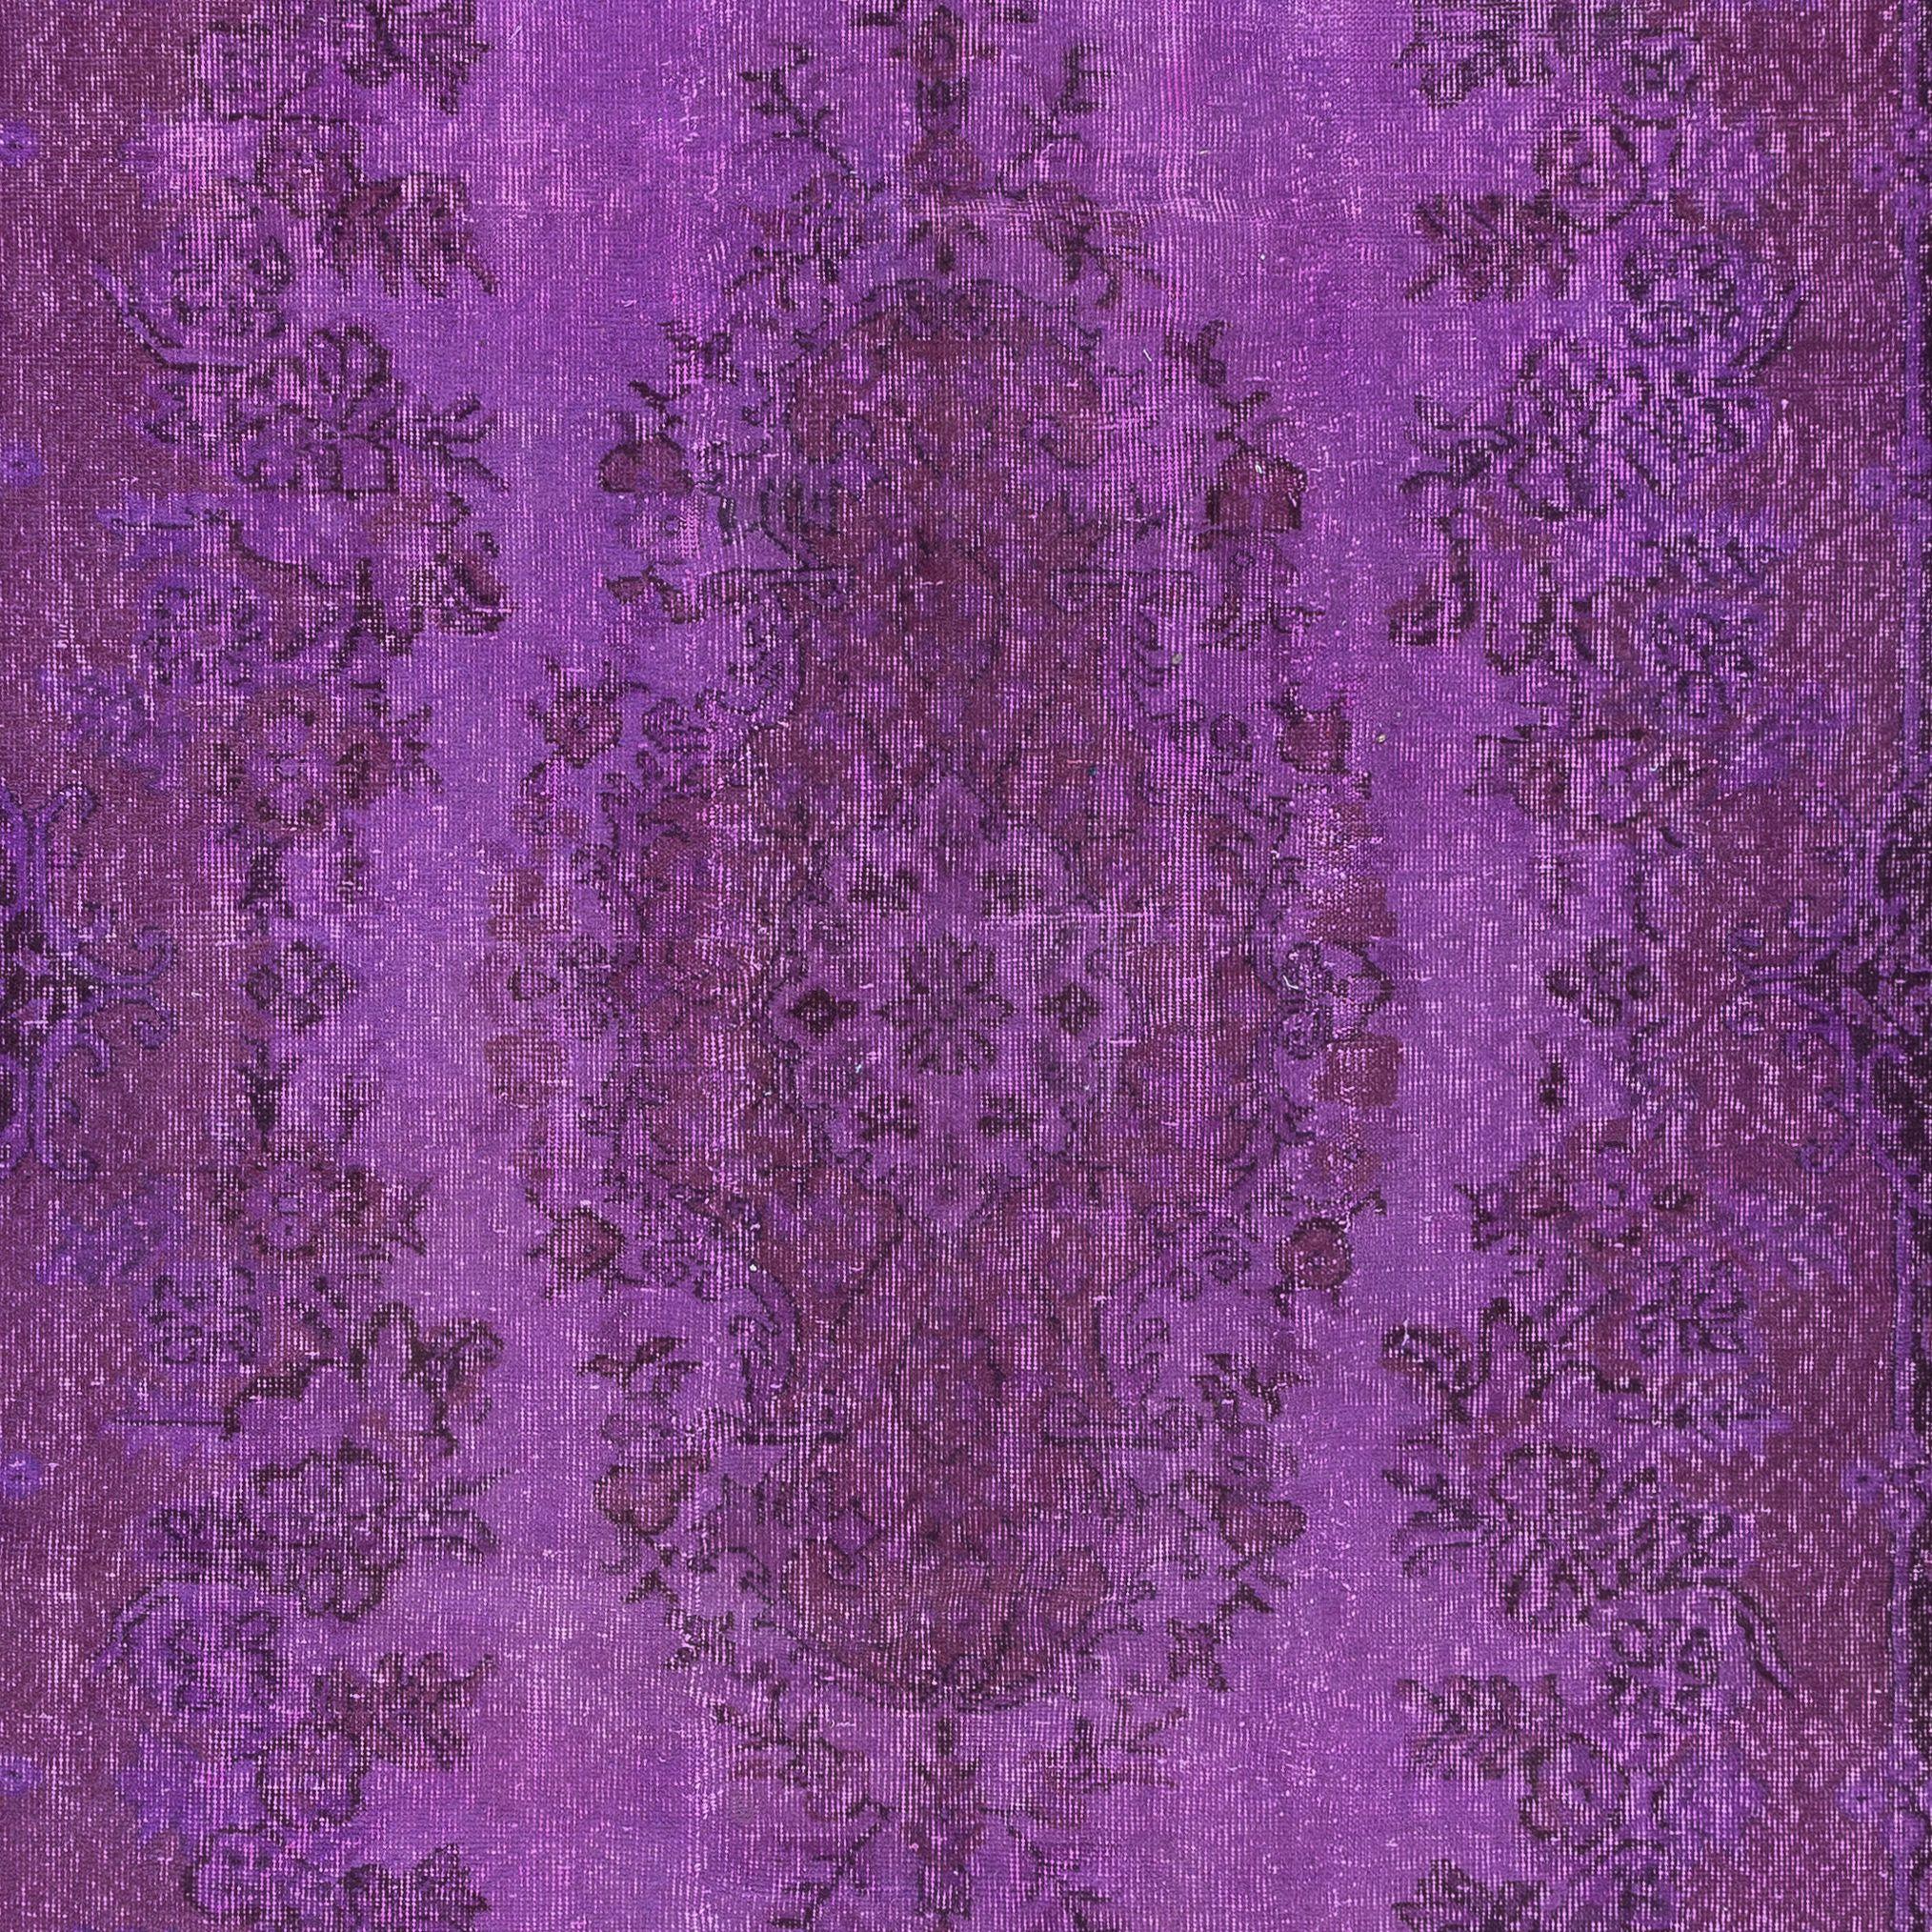 Hand-Woven 5.7x10 Ft Handmade Turkish Sparta Area Rug in Purple, Ideal for Modern Interiors For Sale